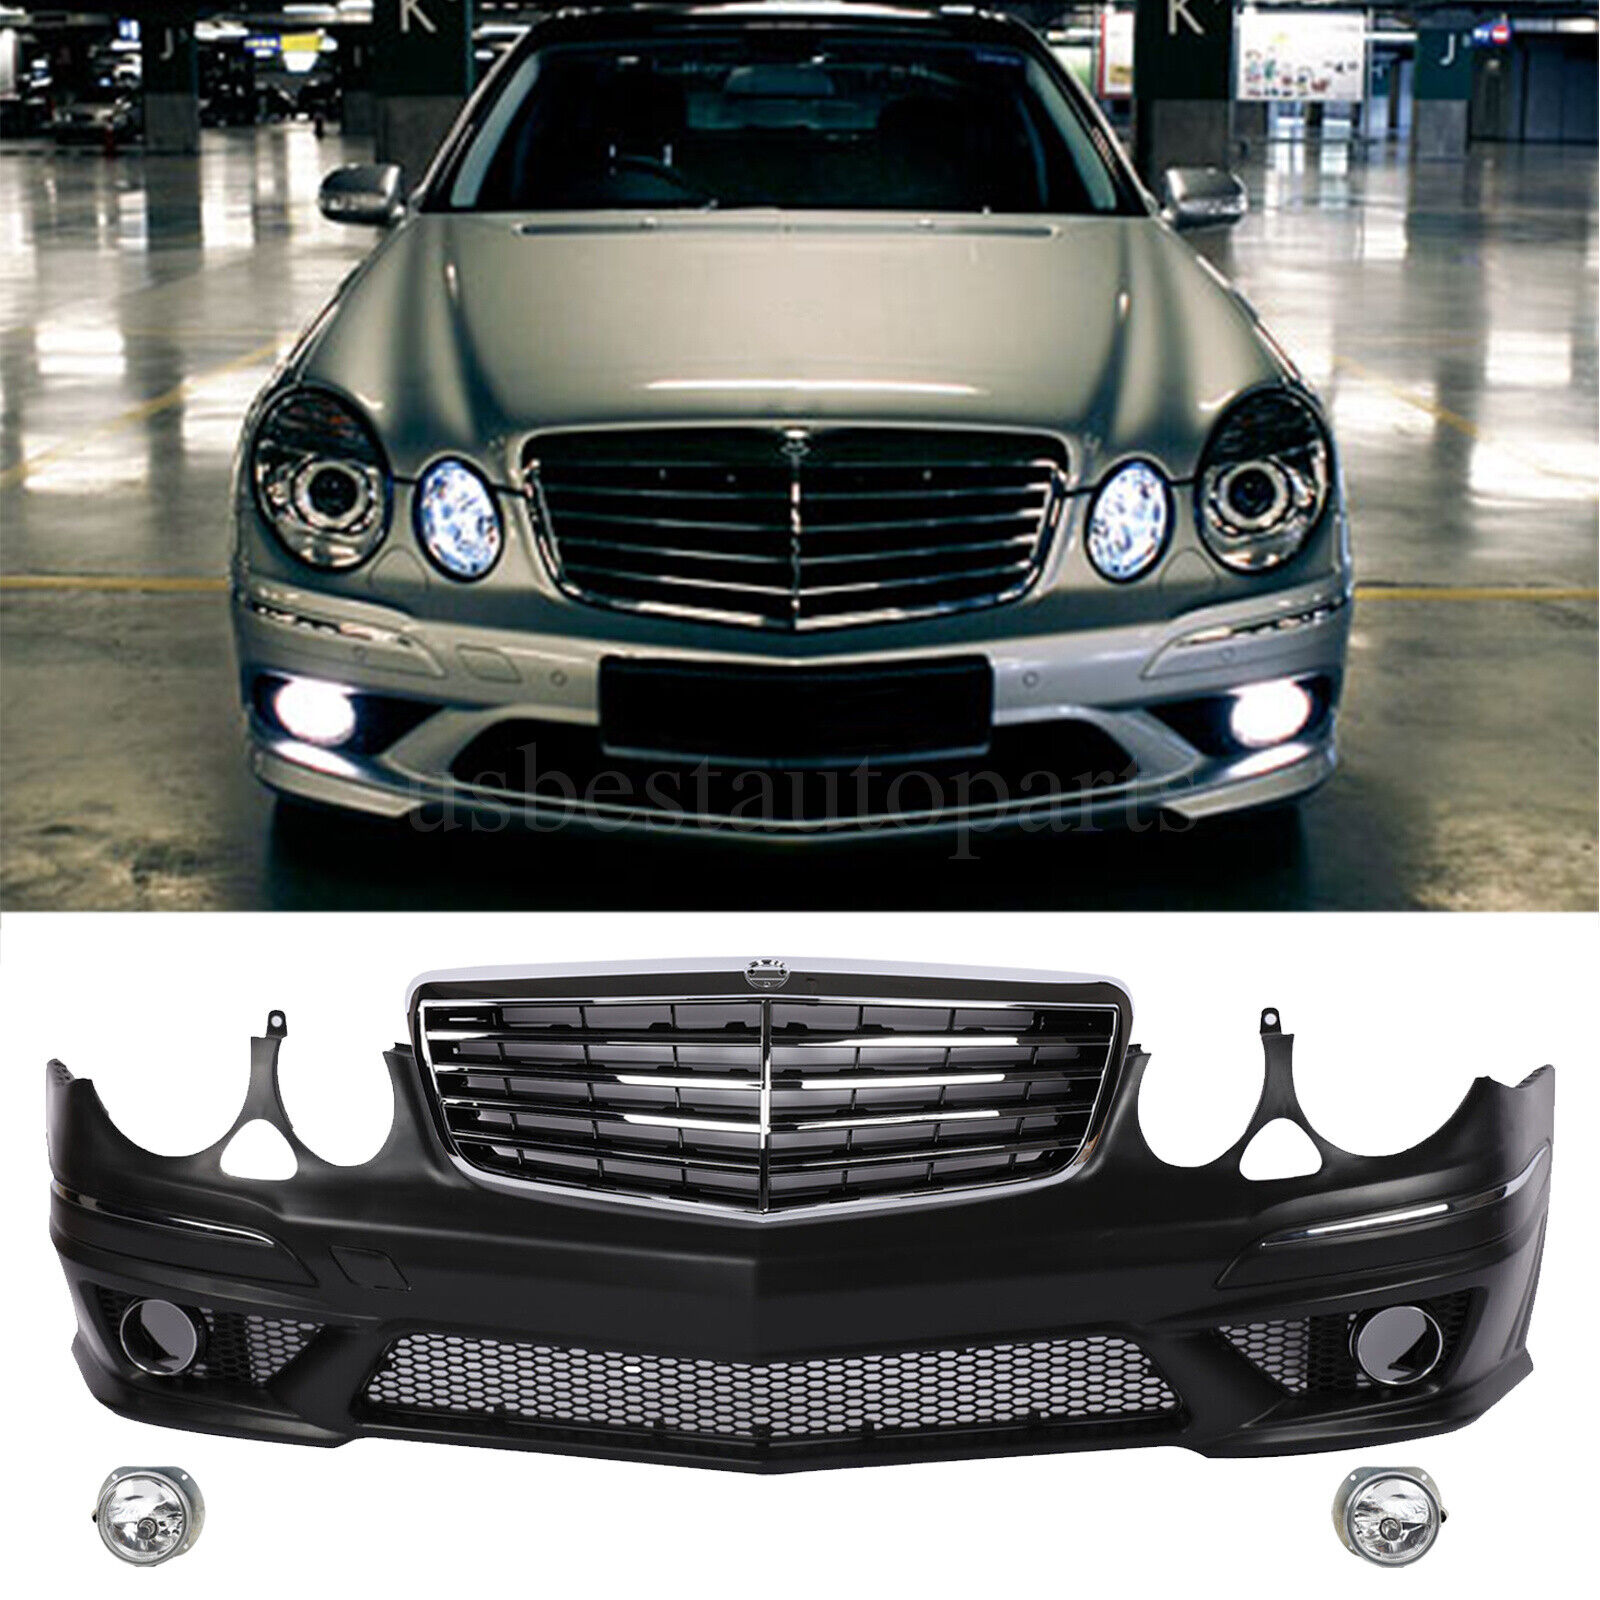 Amg Style Front Bumper Kit W/Grill W/Fog lights for Mercedes Benz E-Class 03-09